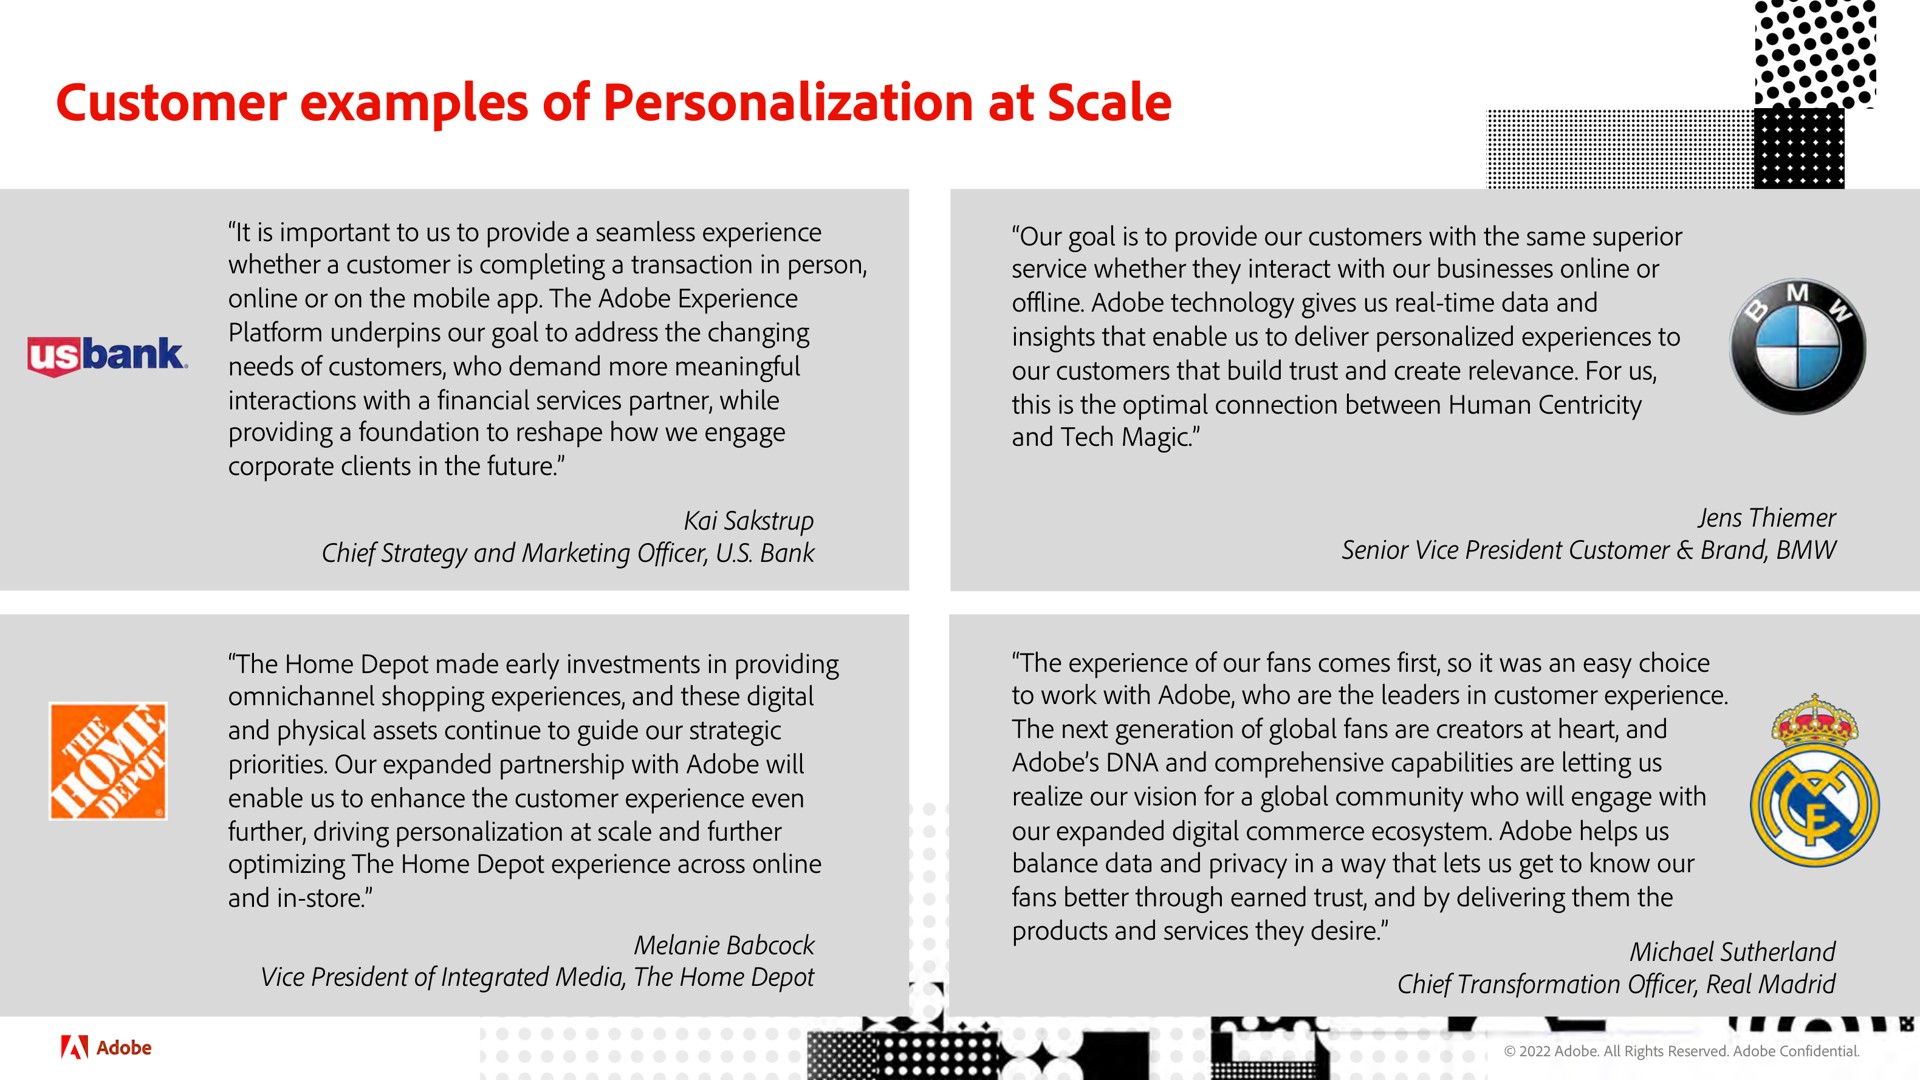 customer examples of personalization at scale i | Adobe